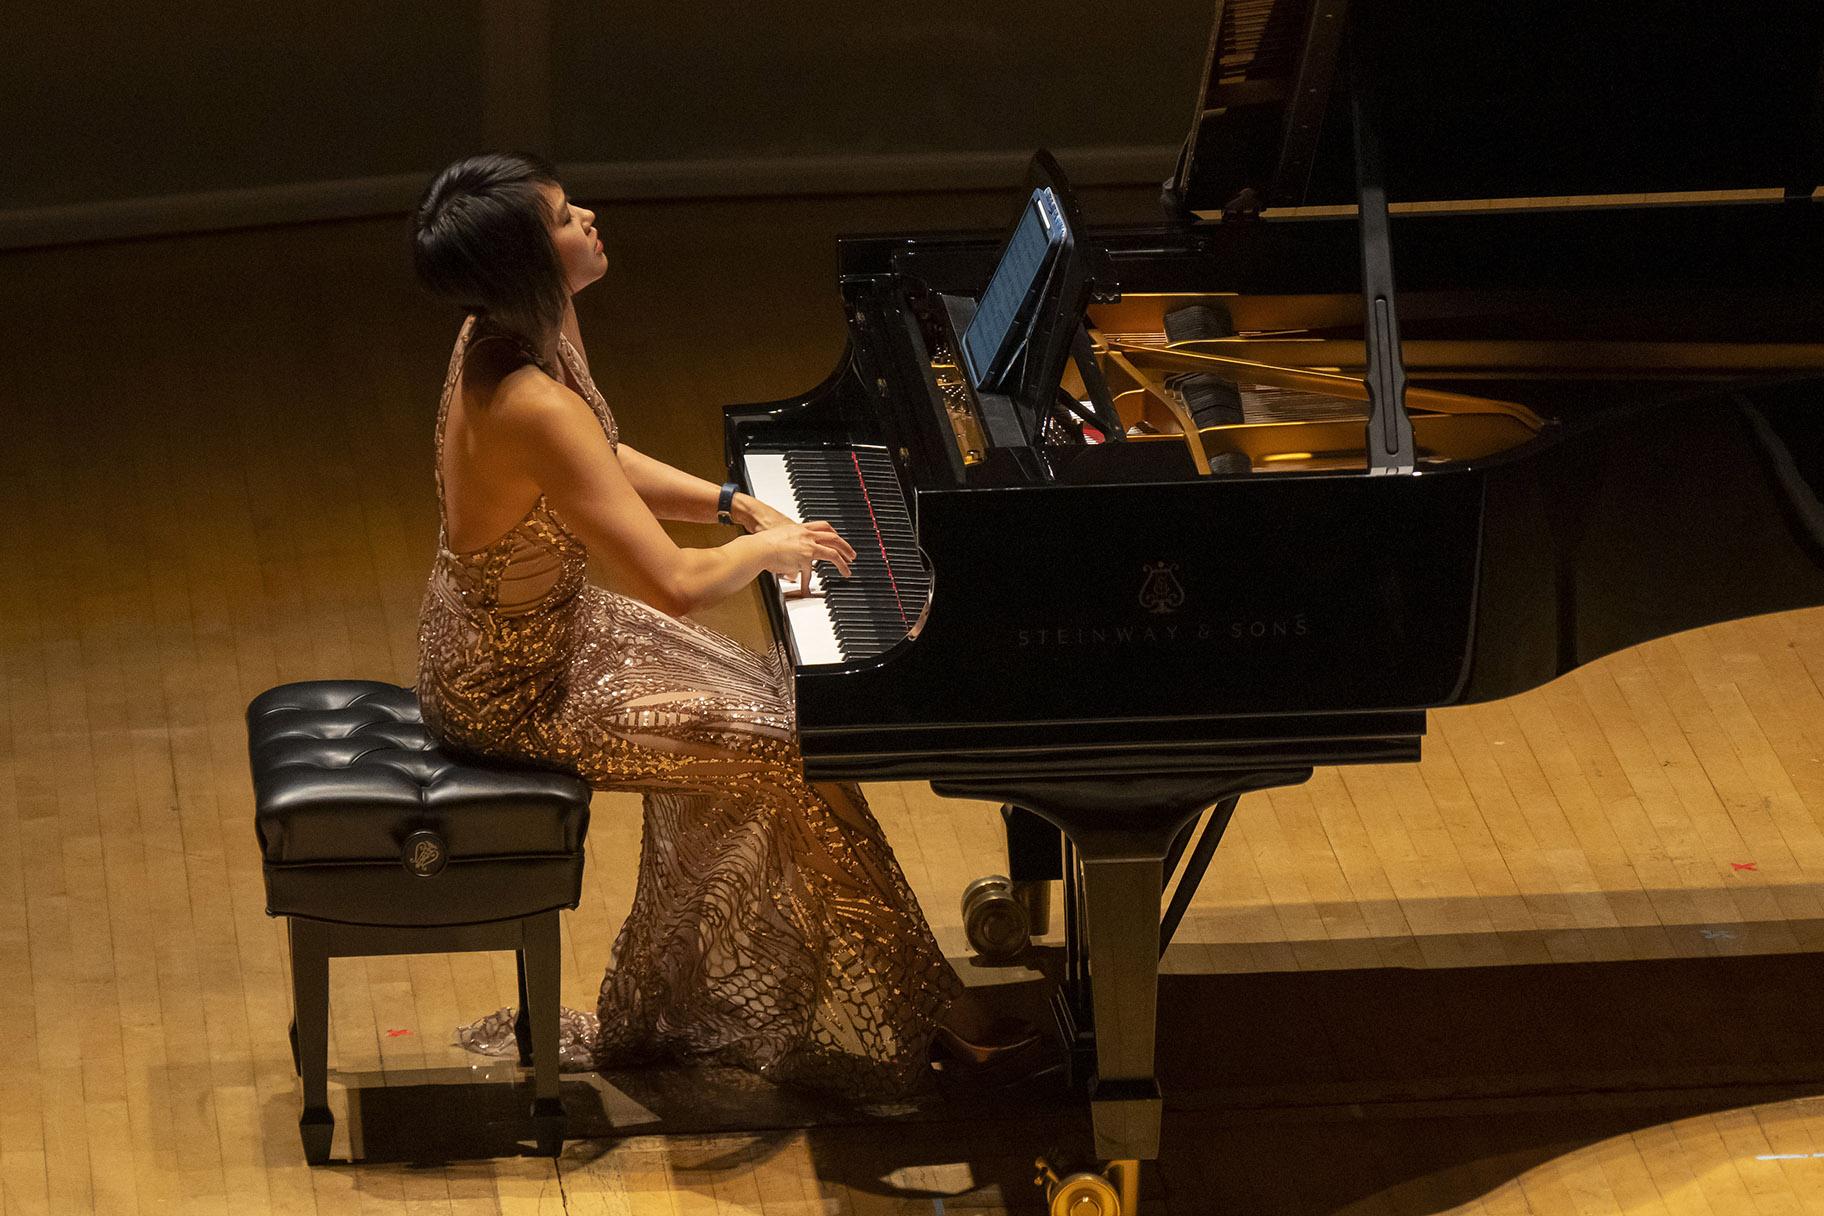 Yuja Wang performs a program with works by Bach, Beethoven, and Schoenberg, April 10, 2022. (Credit: Todd Rosenberg photography)